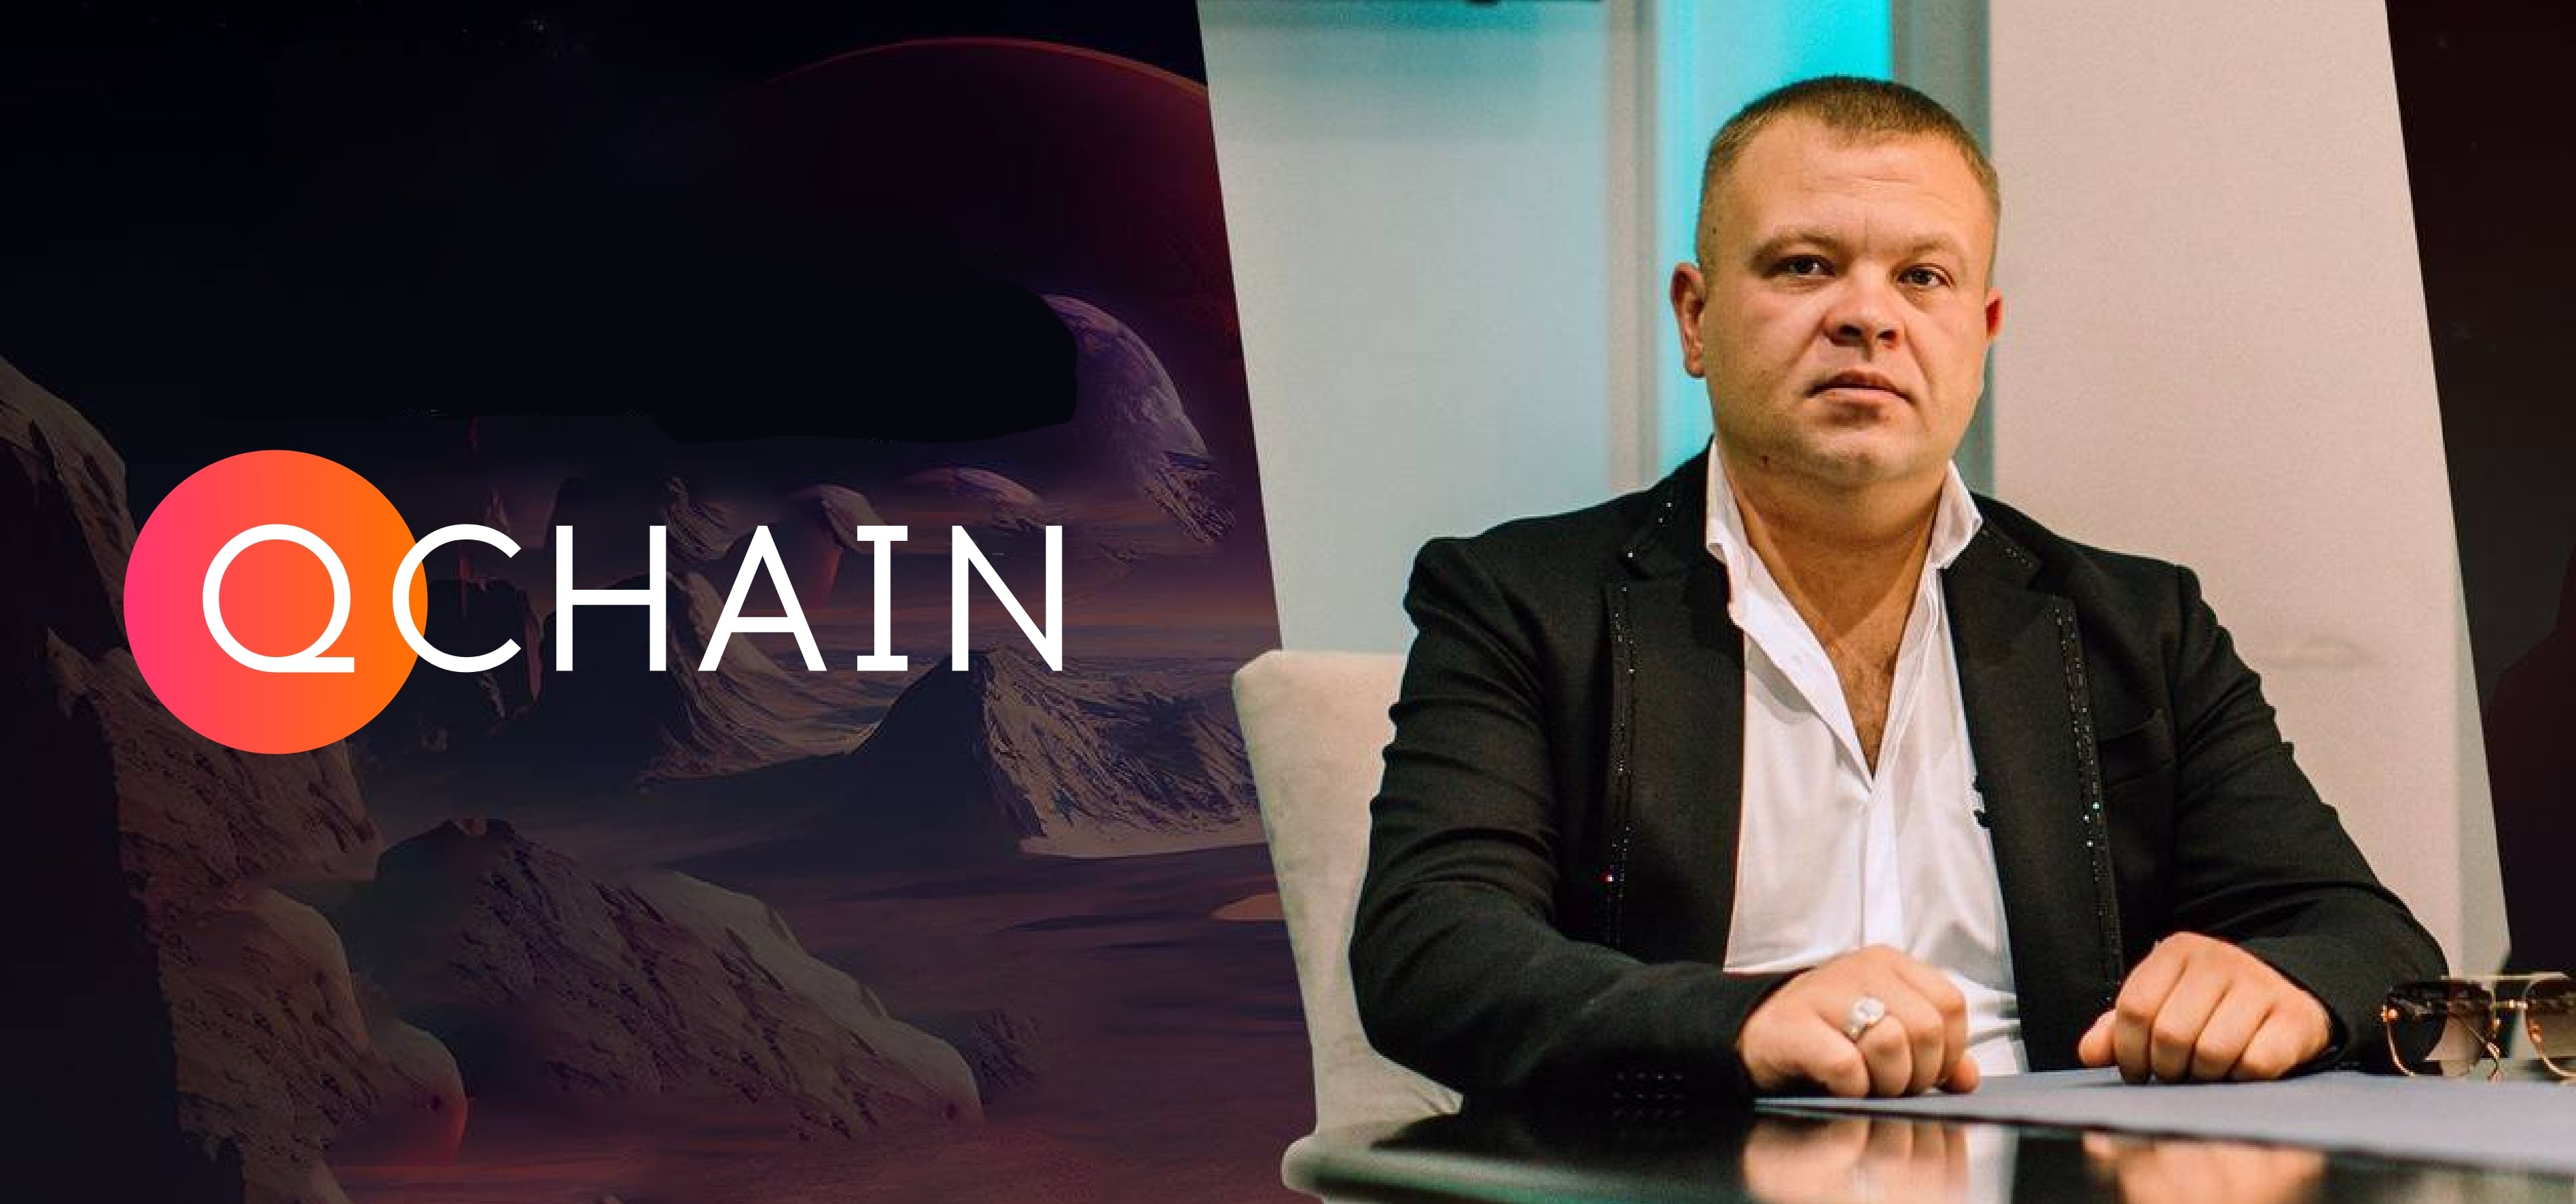 Forbes about Qchain CEO Andrei Zaitev